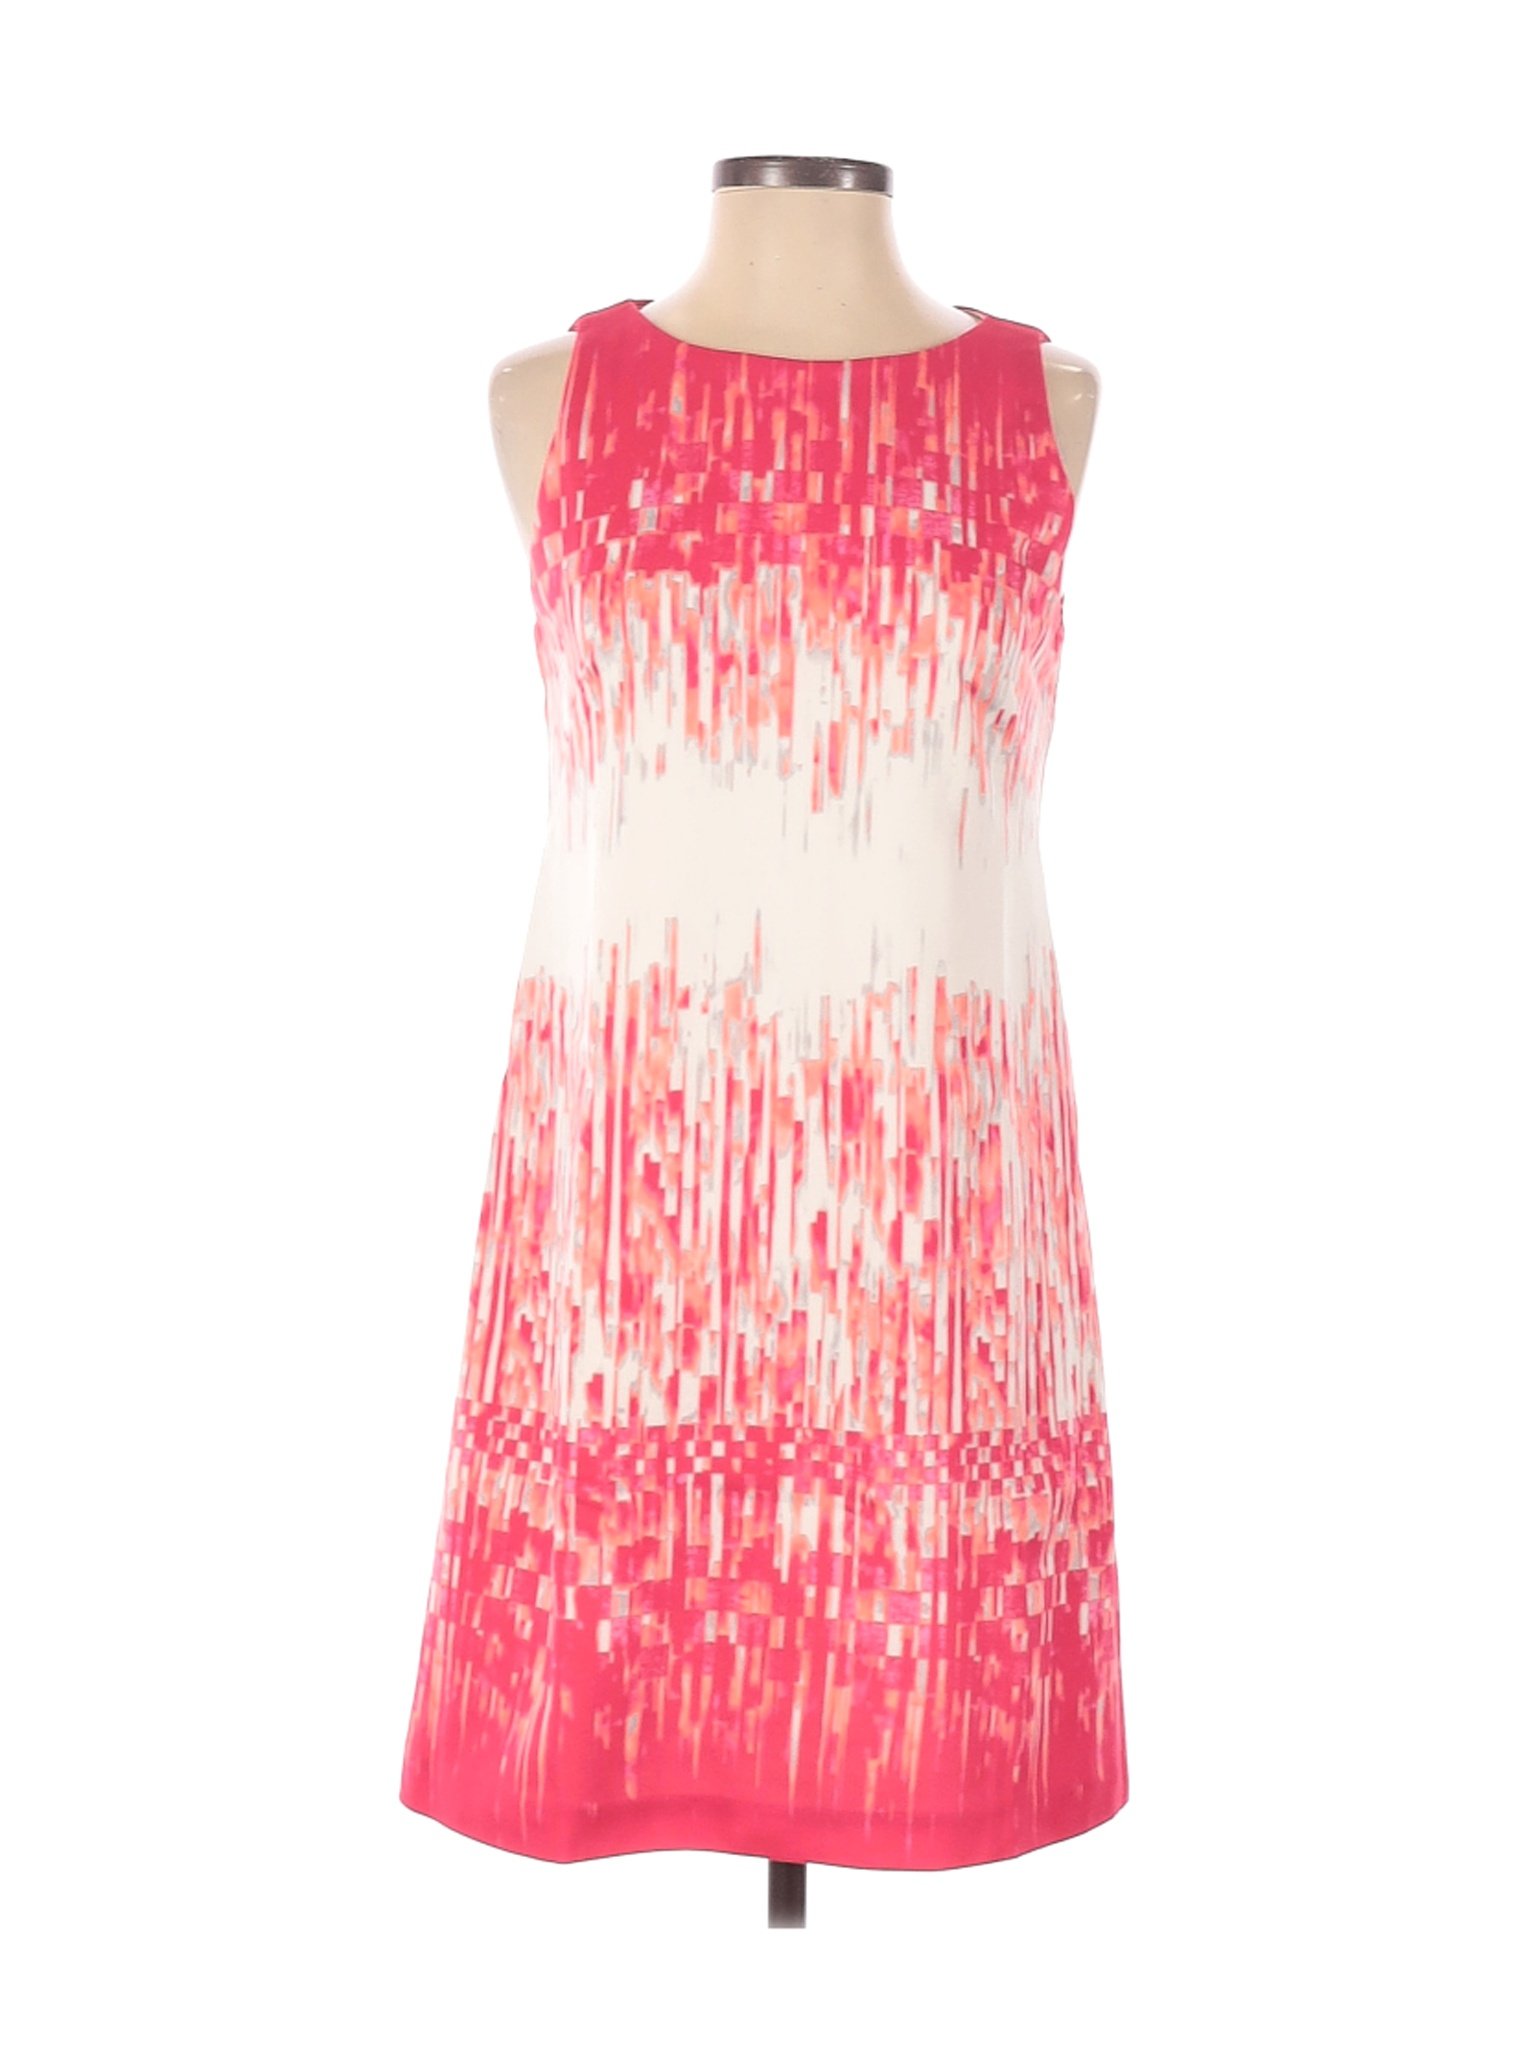 Vince Camuto Women Pink Casual Dress 4 | eBay